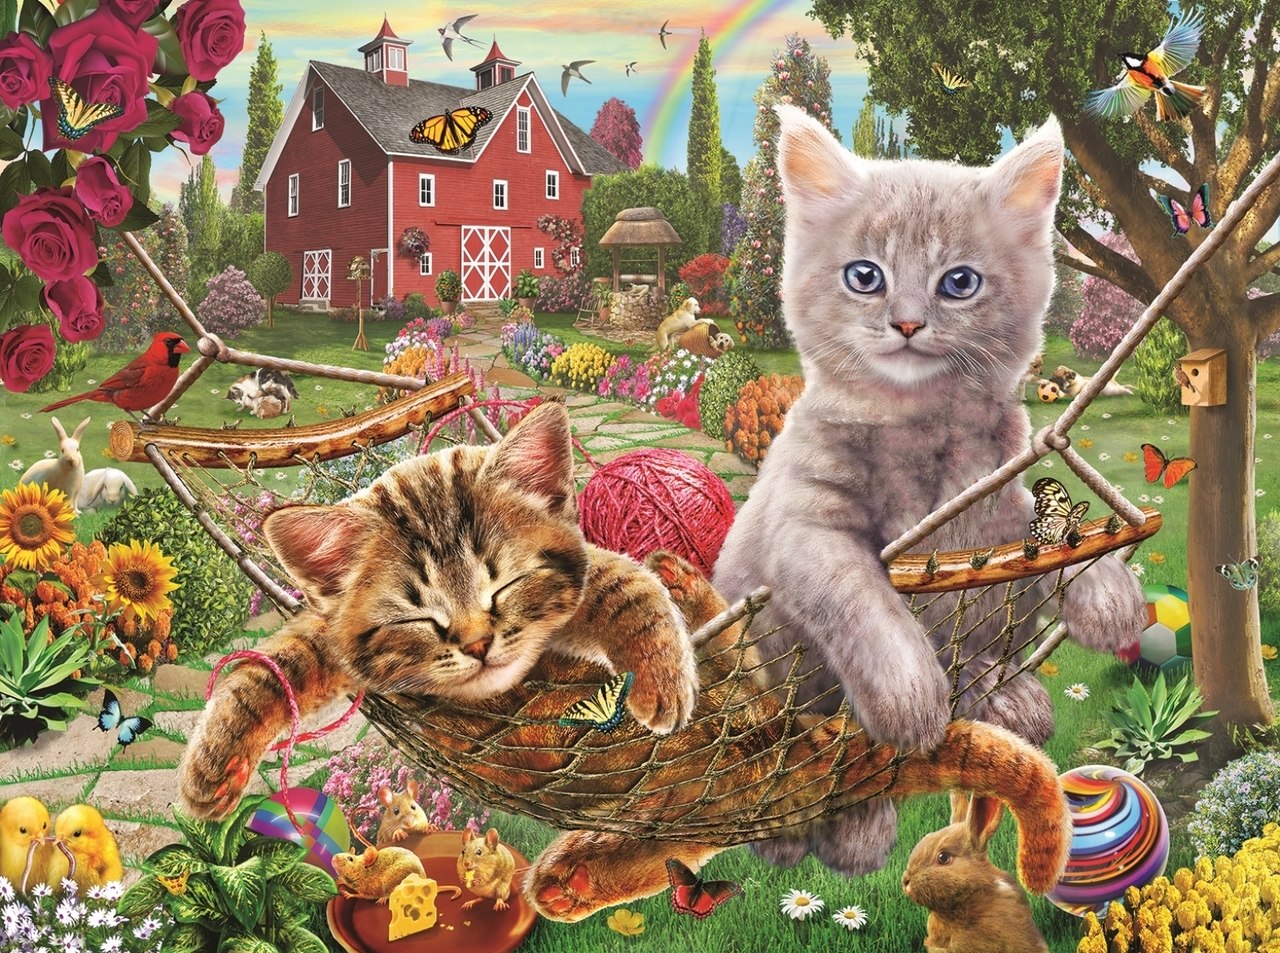 Cats on the Farm - 300pc Jigsaw Puzzle By Sunsout  			  					NEW - image main